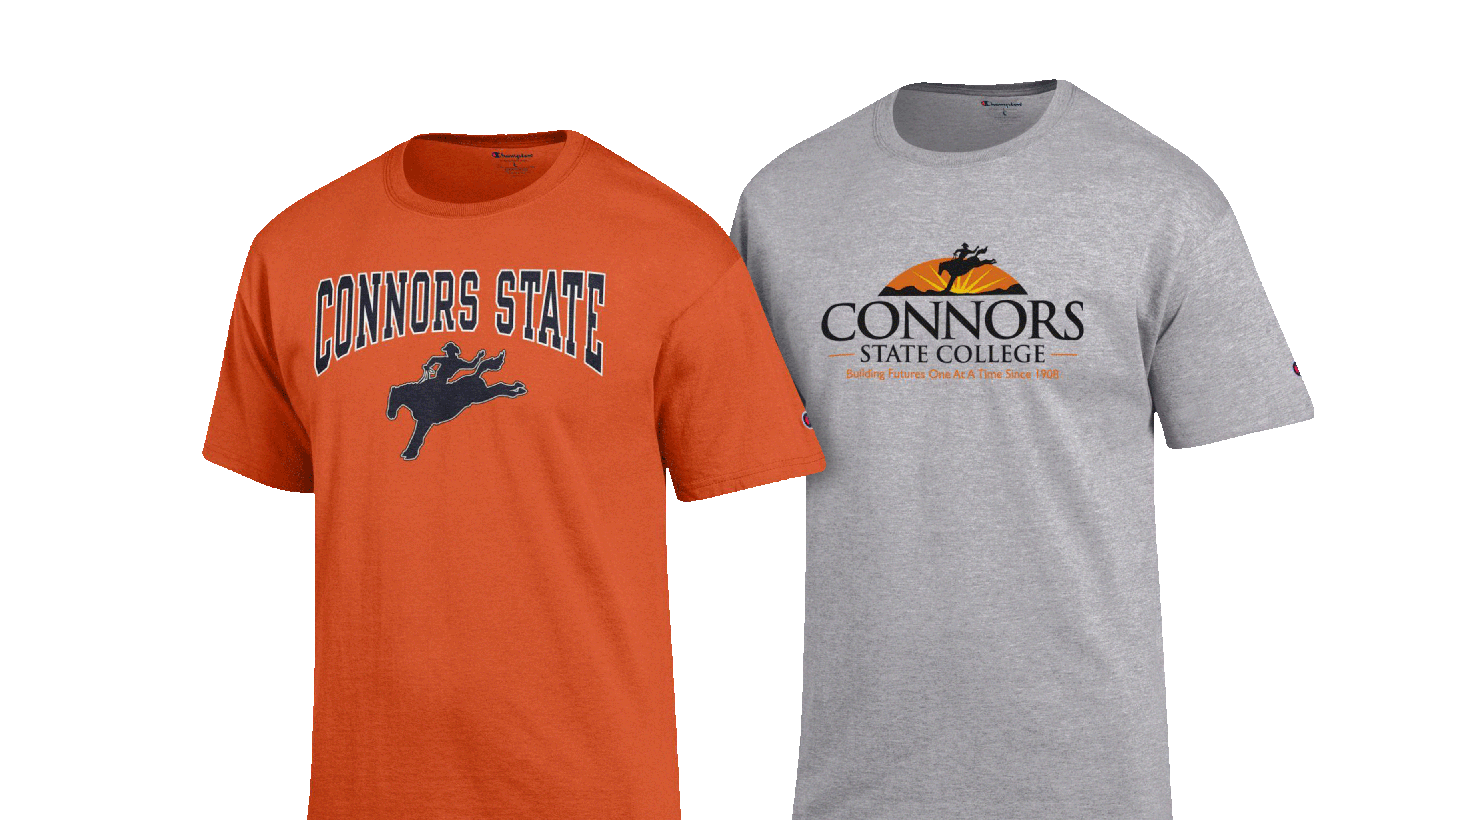 Connors State College Warner Campus Store Apparel, Merchandise, & Gifts